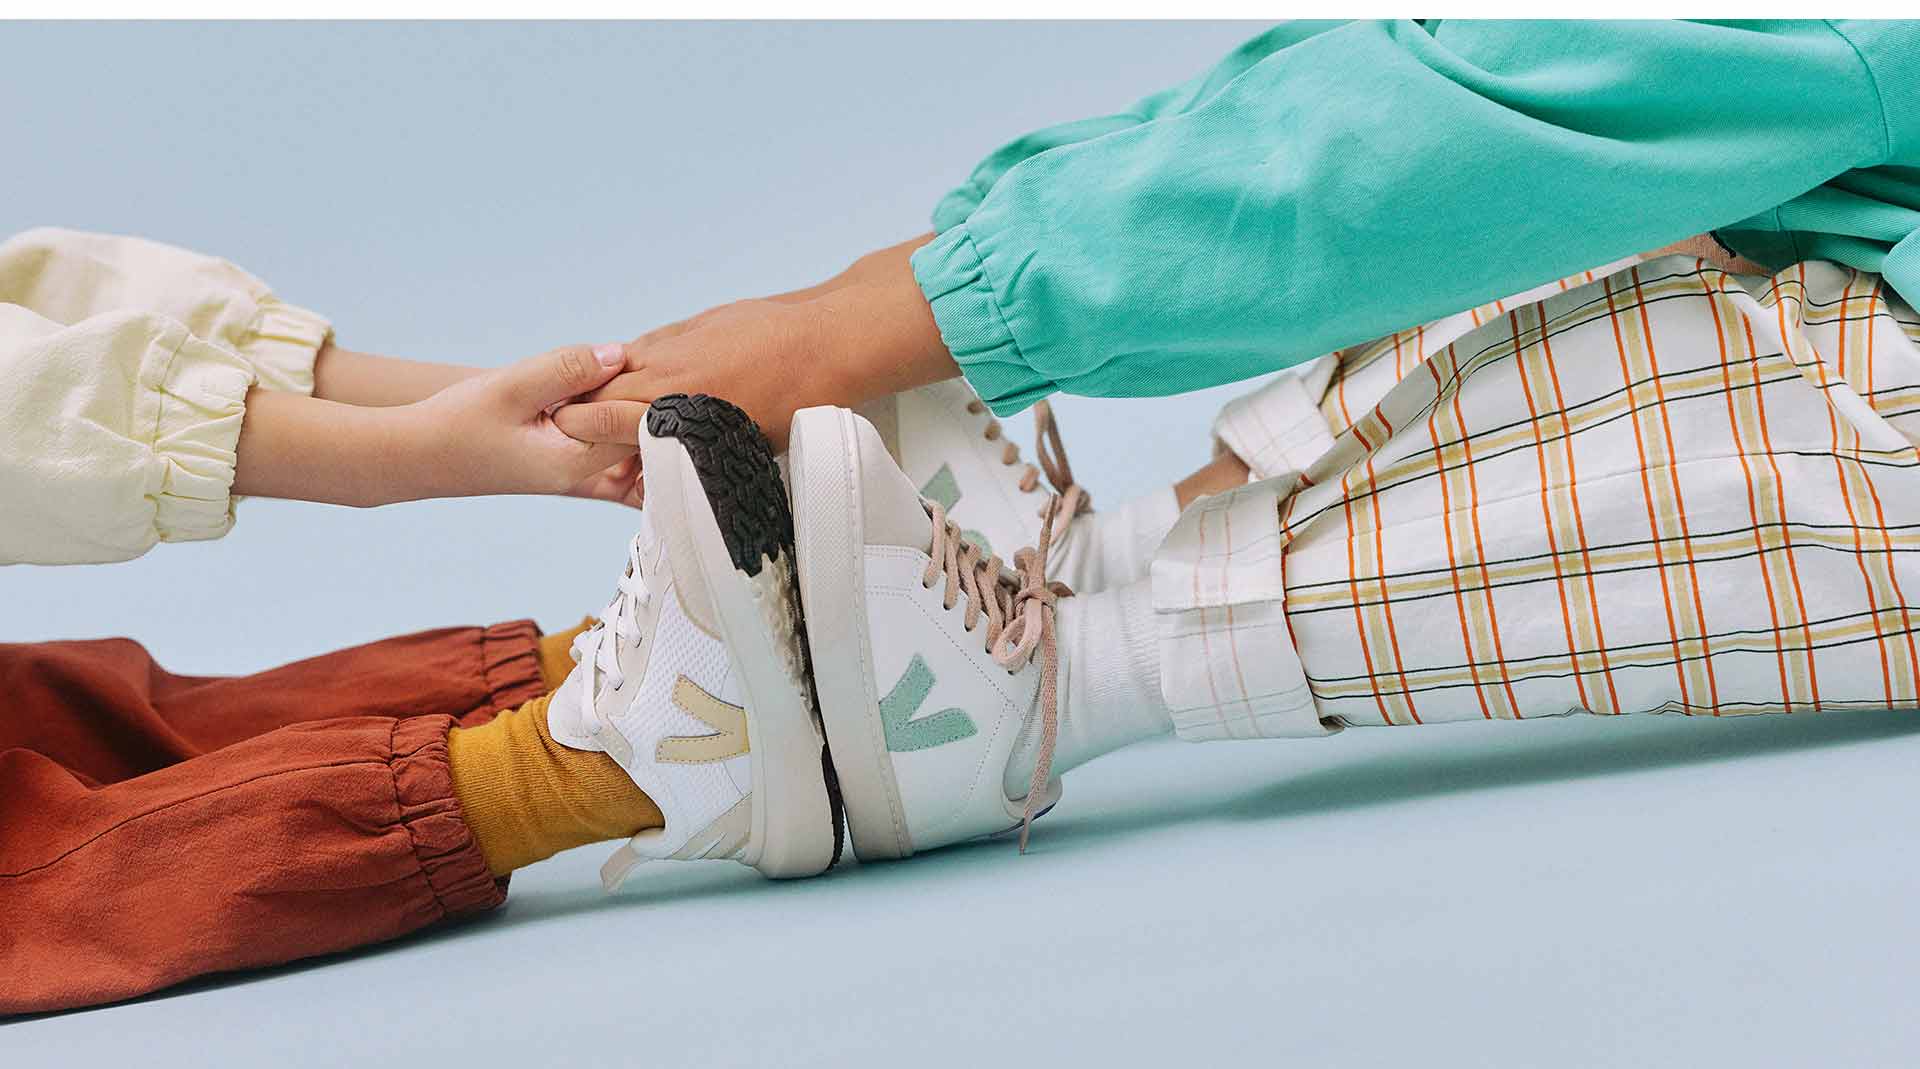 Focus on the hands of two children wearing Veja shoes